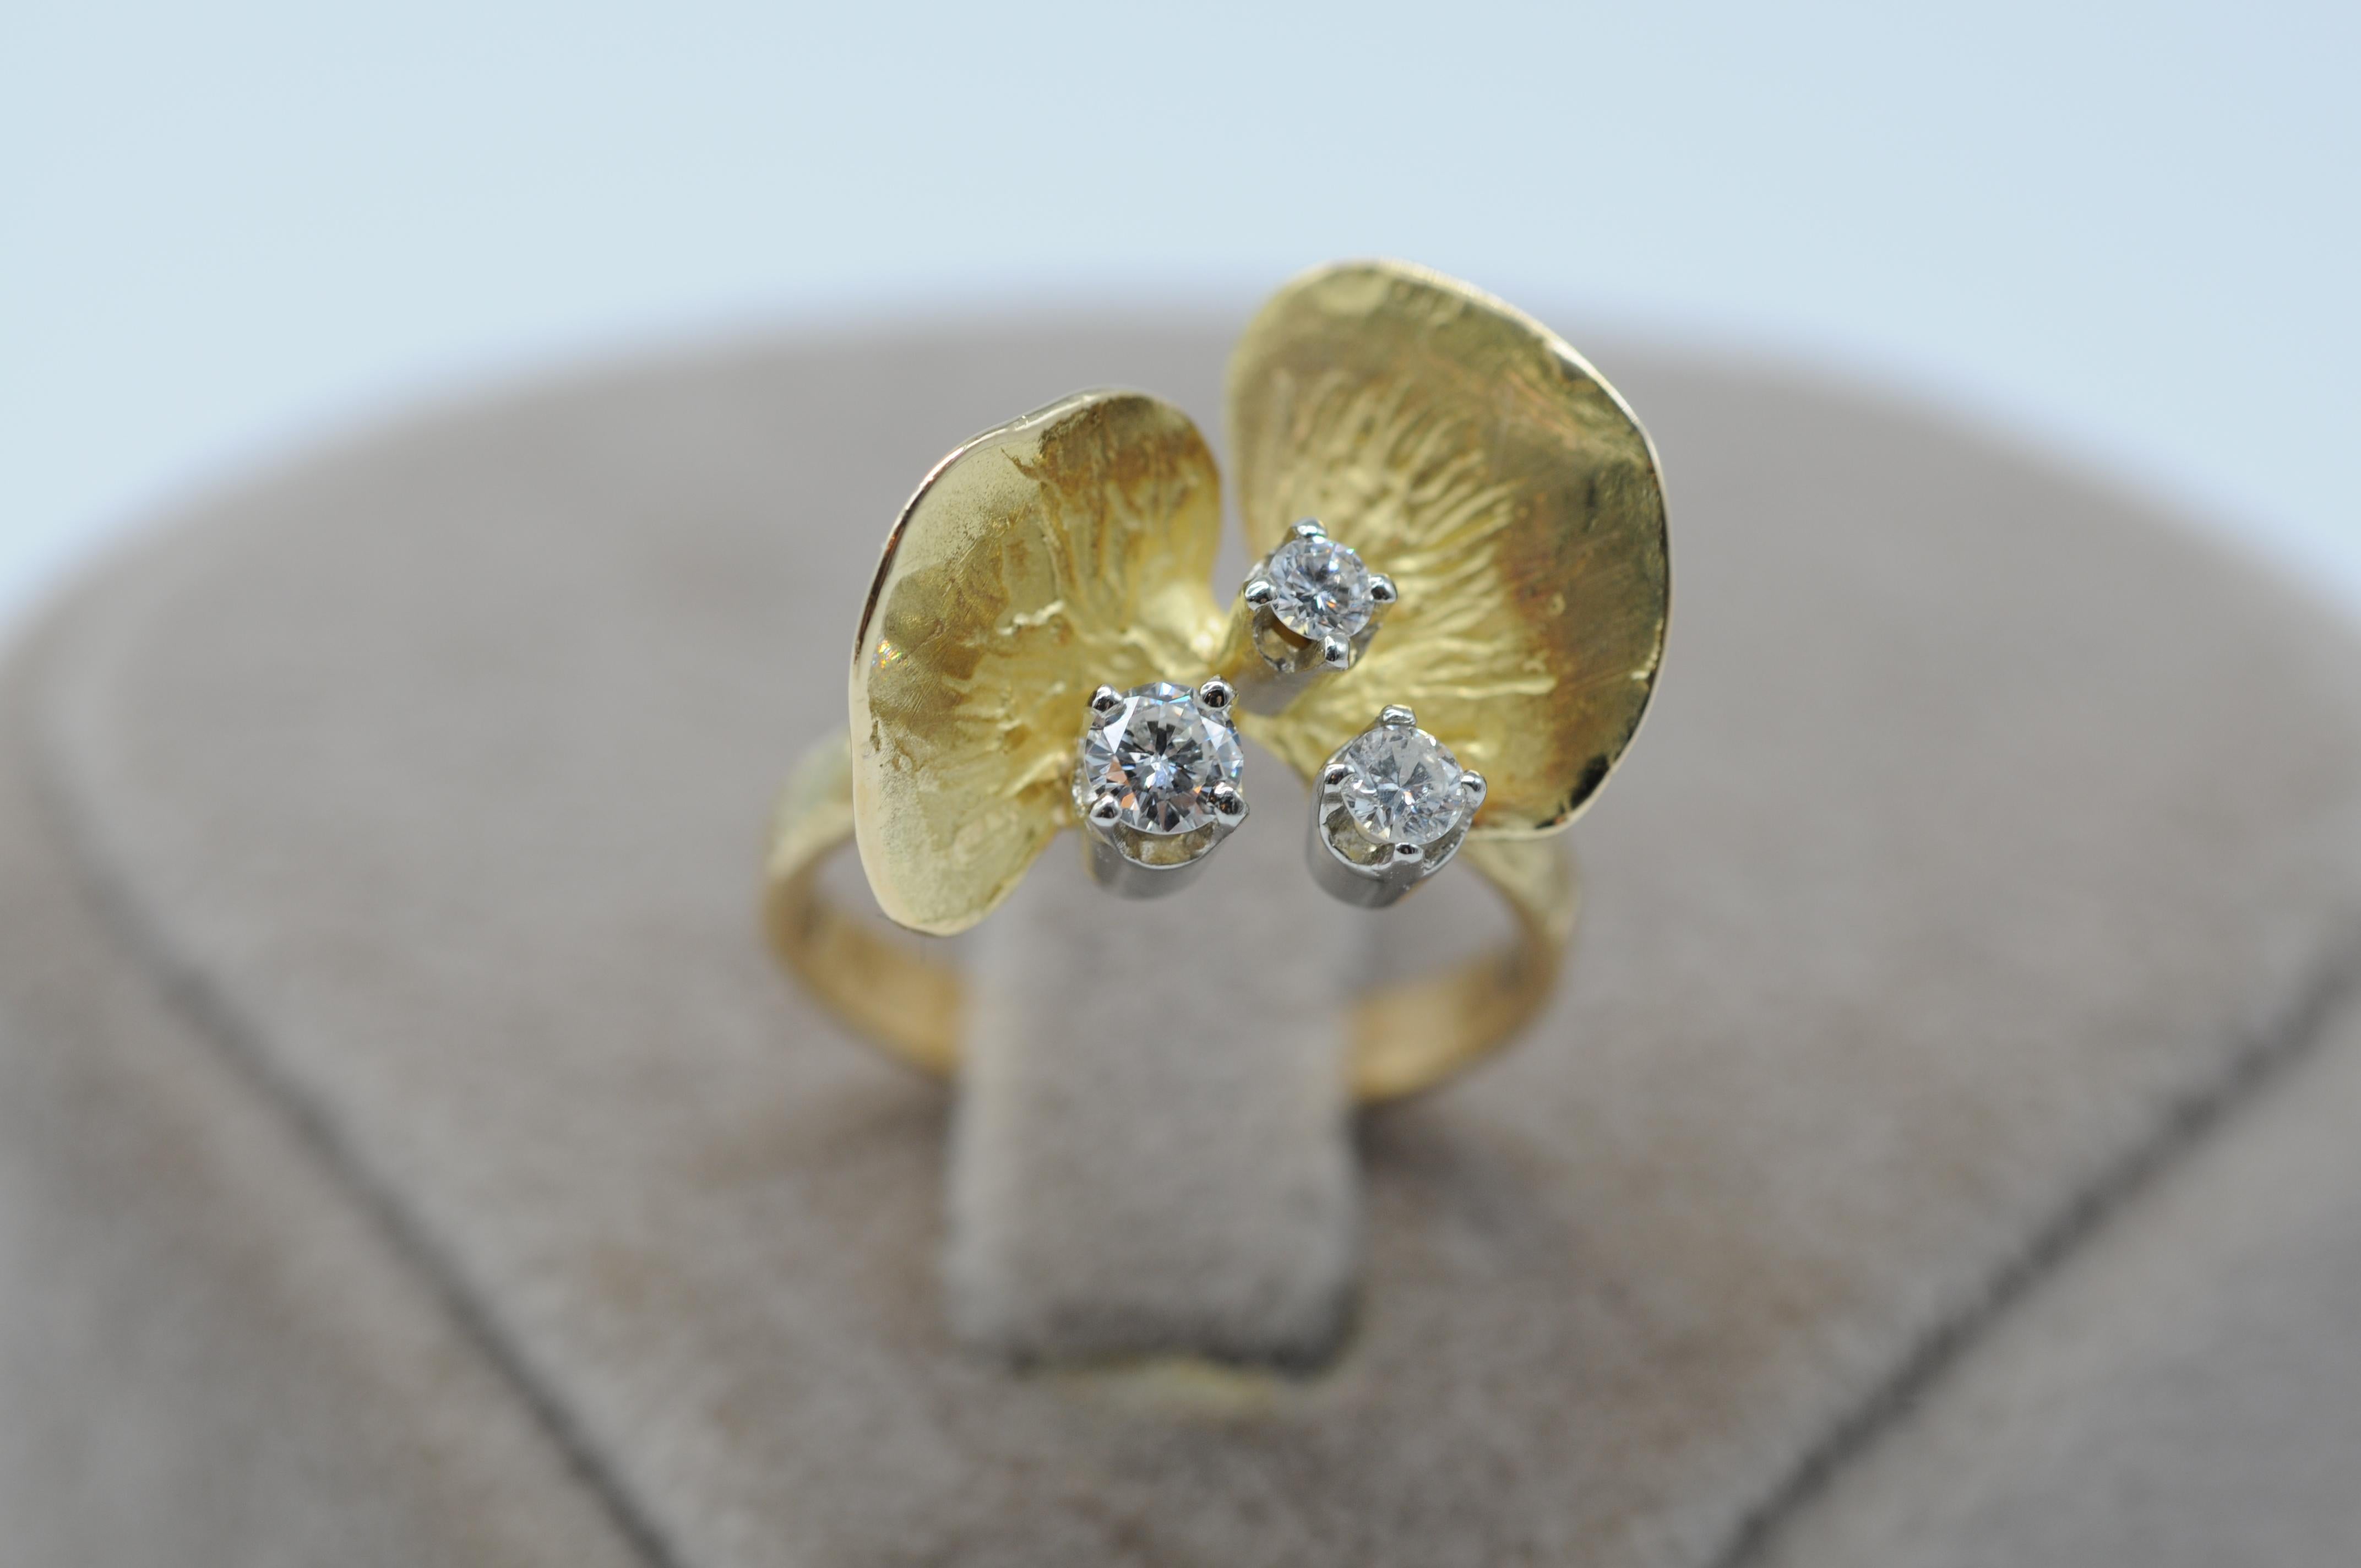 Aesthetic Movement Majestic gold ring with diamonds by master goldsmith Wurzbacher For Sale